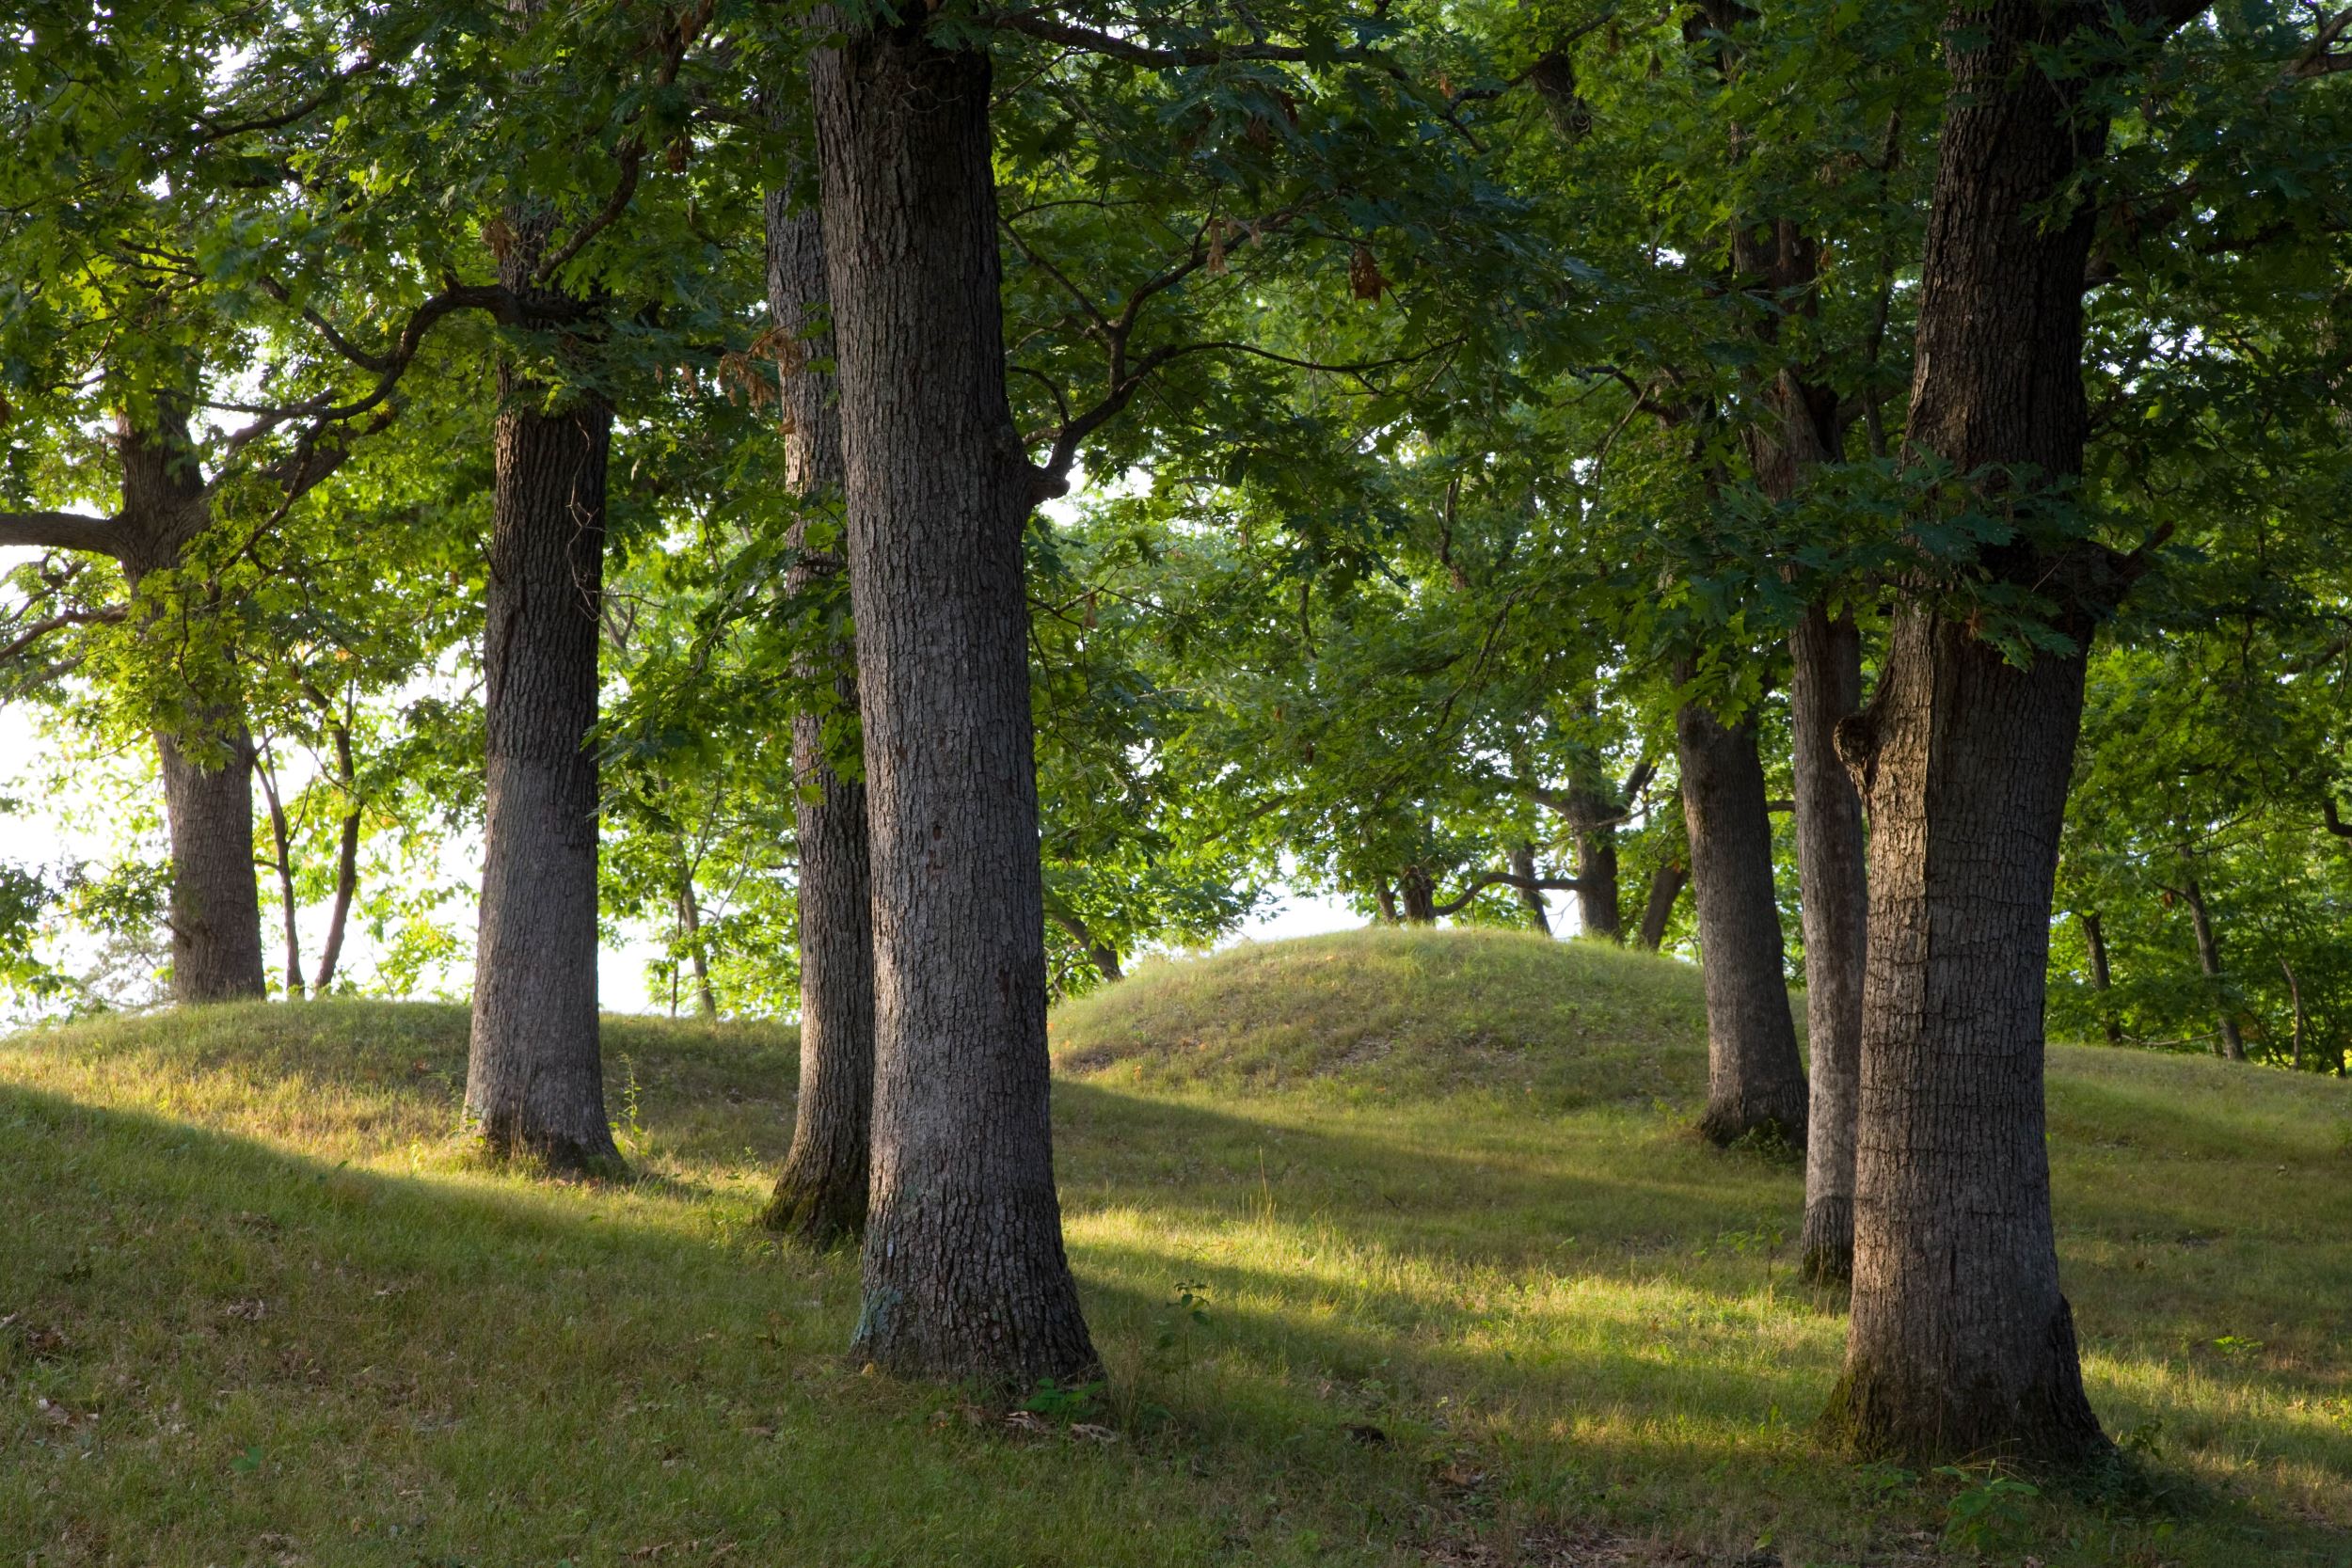 Native American Mounds